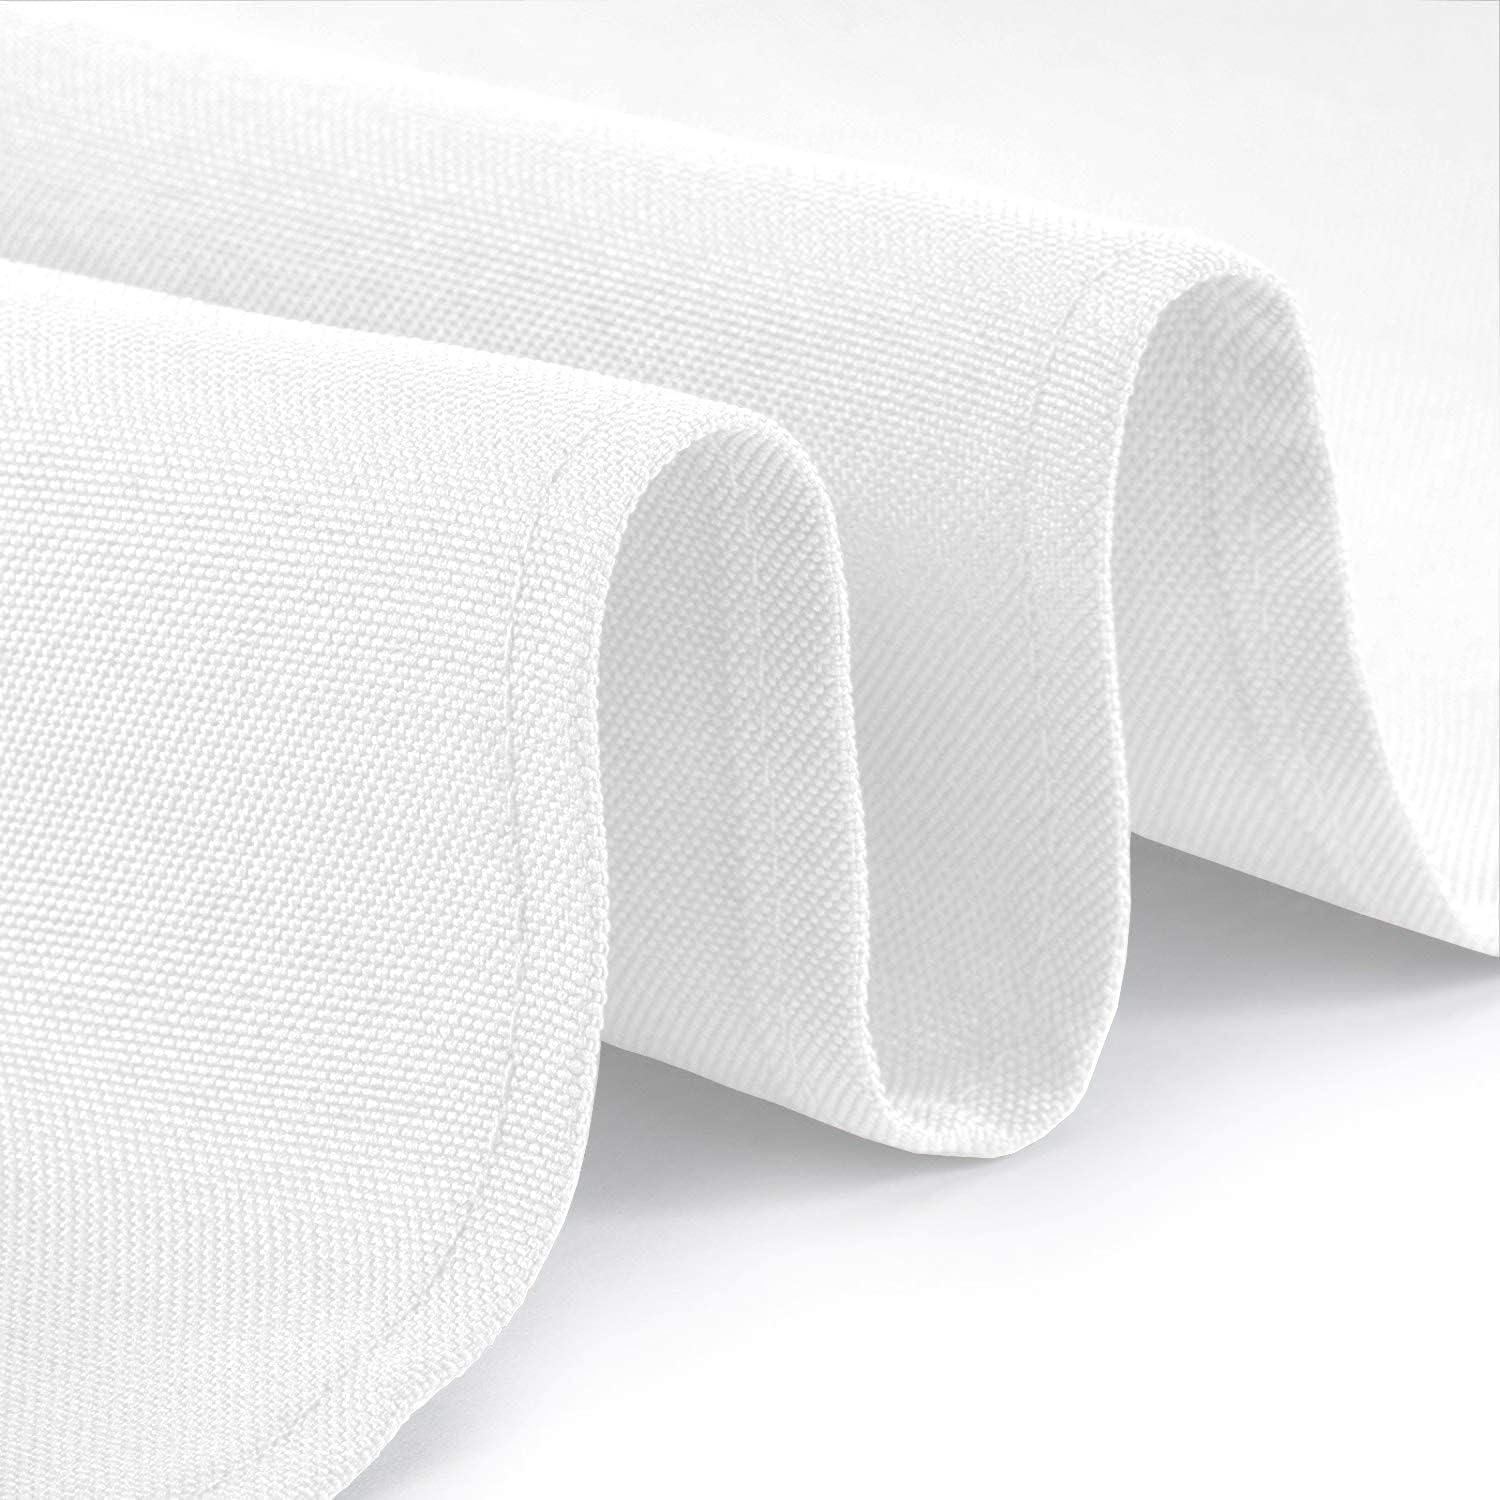 2 Square Tablecloth Covers 52x52 Inch | Table Cloths for Square or Round Table | 200 GSM Washable Wrinkle-Resistant Fabric for Weddings, Kitchen, Restaurant | White | 2 Pack  - Good